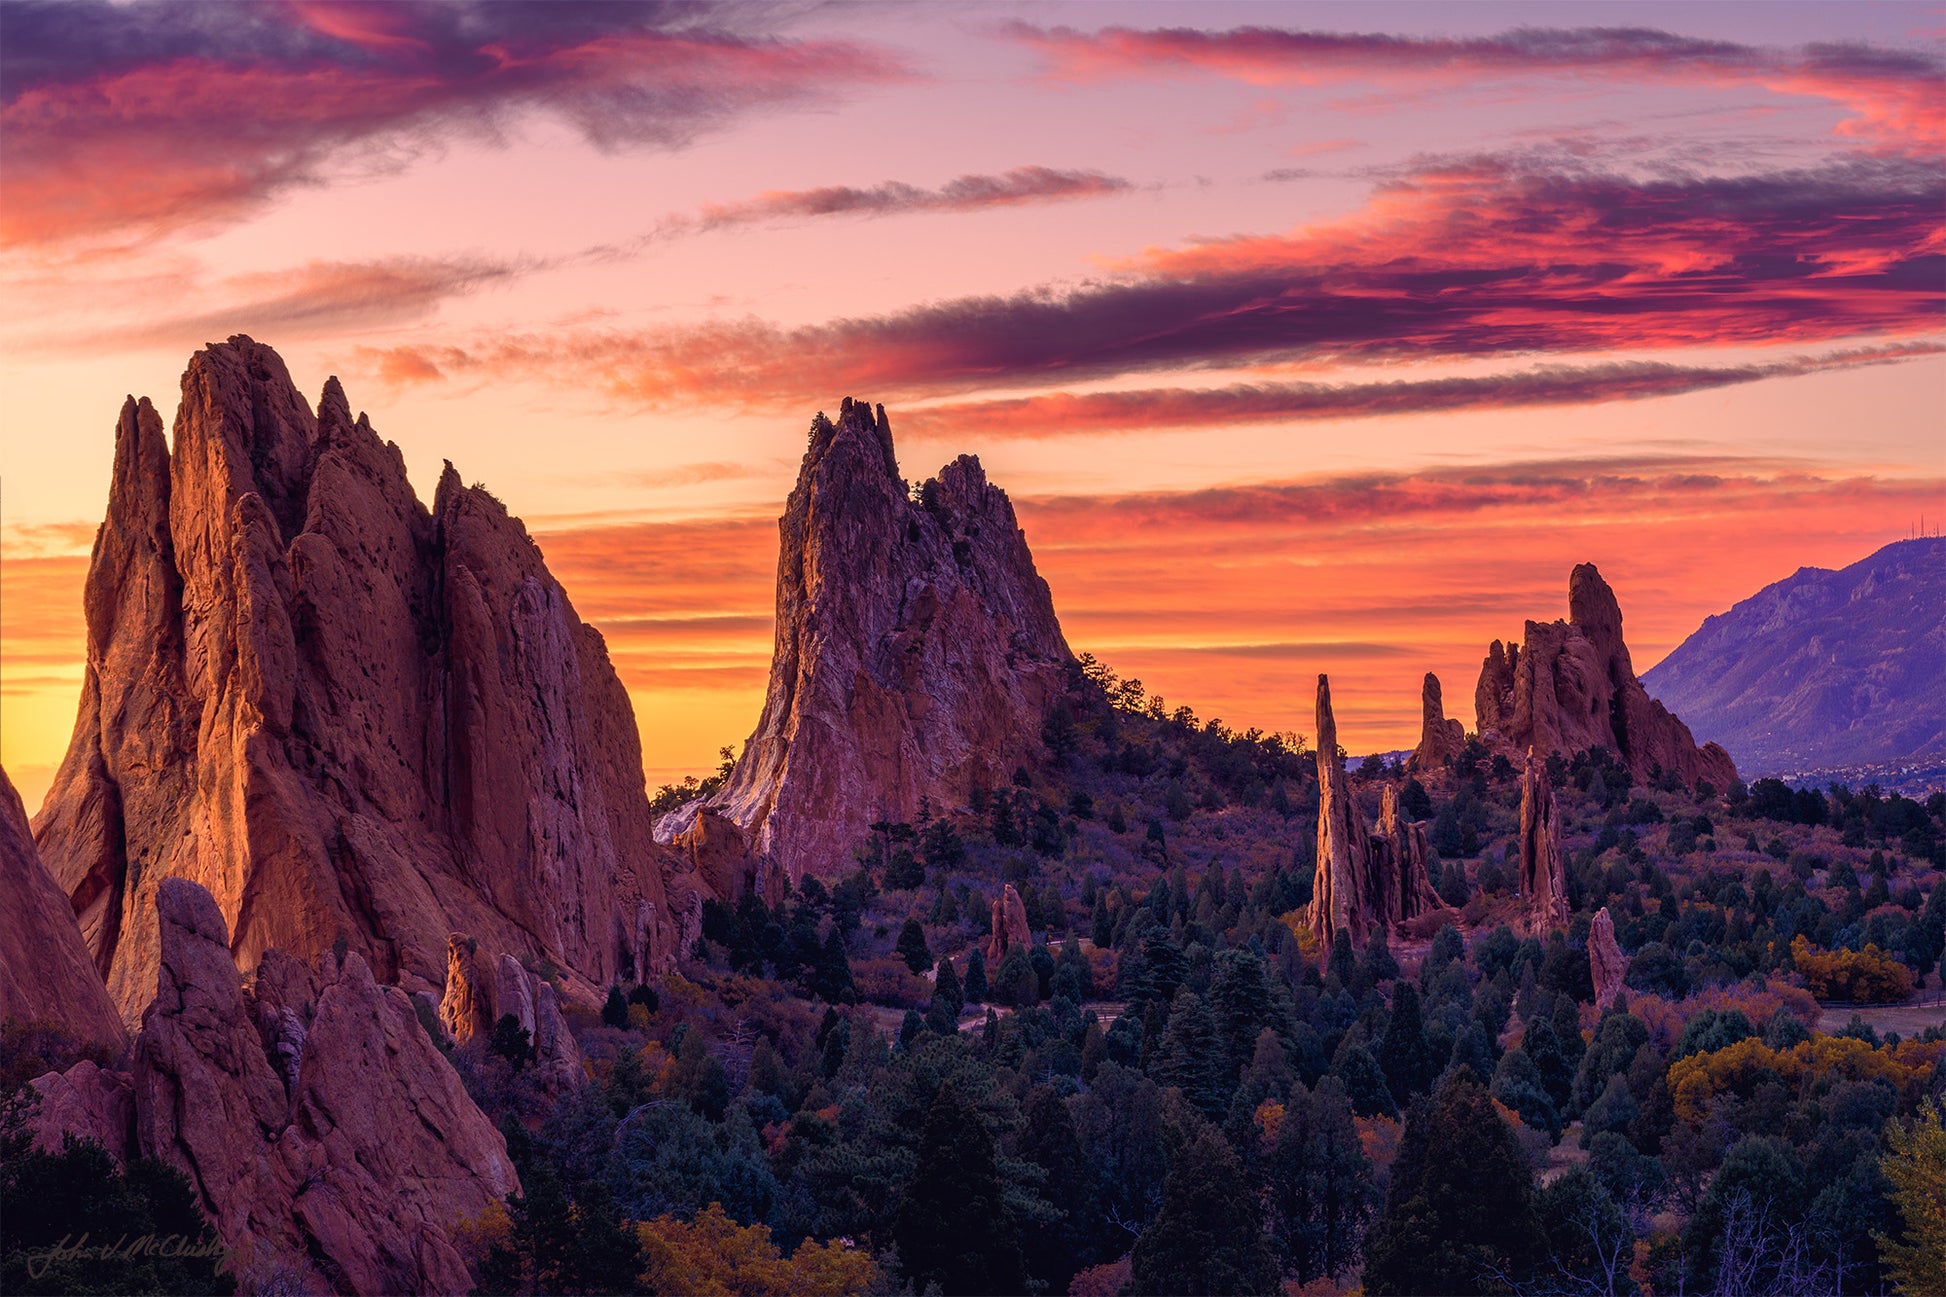 The standing outcrops at the Garden of the Gods glow in the breaking sunlight as the sky glows reds, pinks, and oranges.  Fine Art landscape photography print by McClusky Nature Photography.